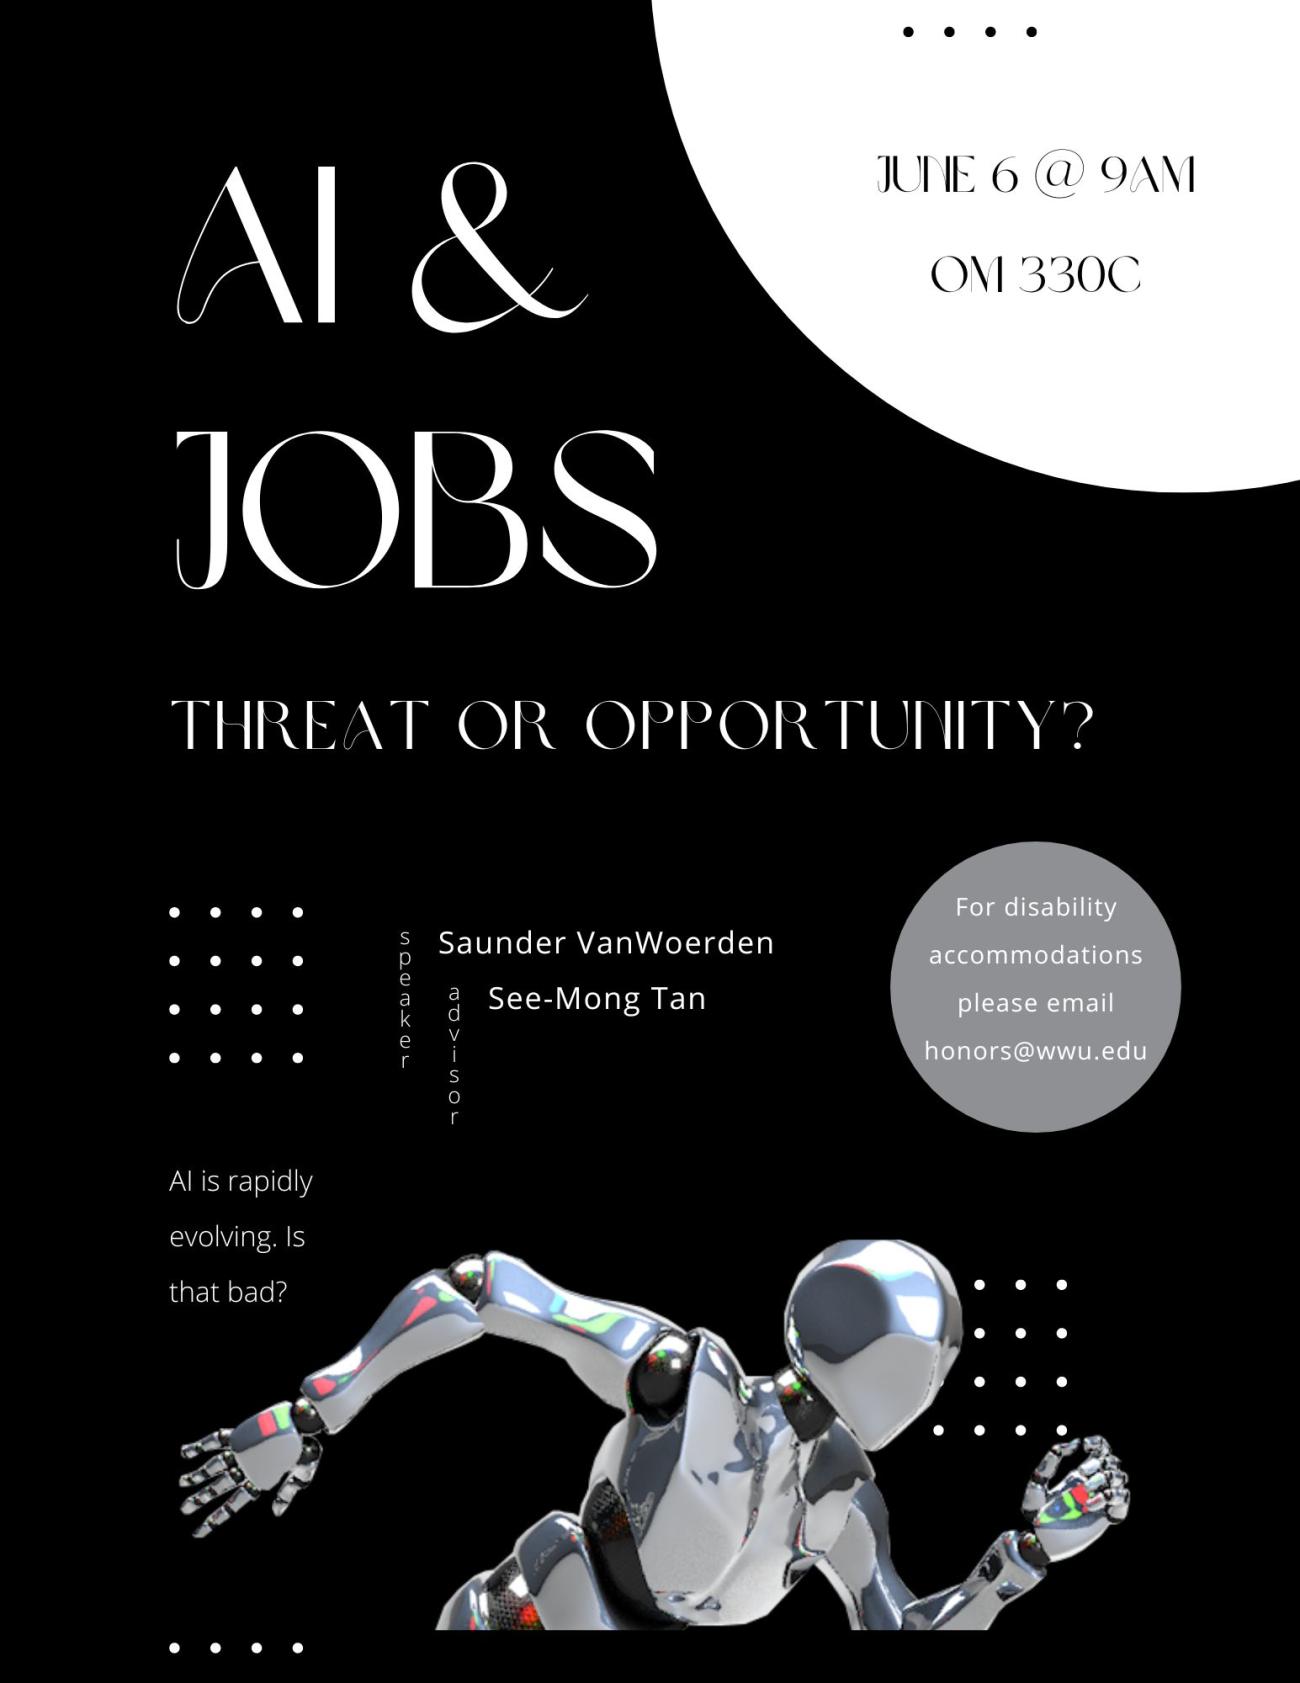 A black poster with white text. There is a large white circle in the top right, with smaller white circles around the poster. At the bottom is a chrome robot visible from the waist up in a running position. The text reads "AI & Jobs: Threat or Opportunity? June 6 @ 9AM OM 330C. Speaker: Saunder VanWoerden, Advisor: See-Mong Tan. AI is rapidly evolving. Is that bad? For disability accommodations, please email honors@wwu.edu."